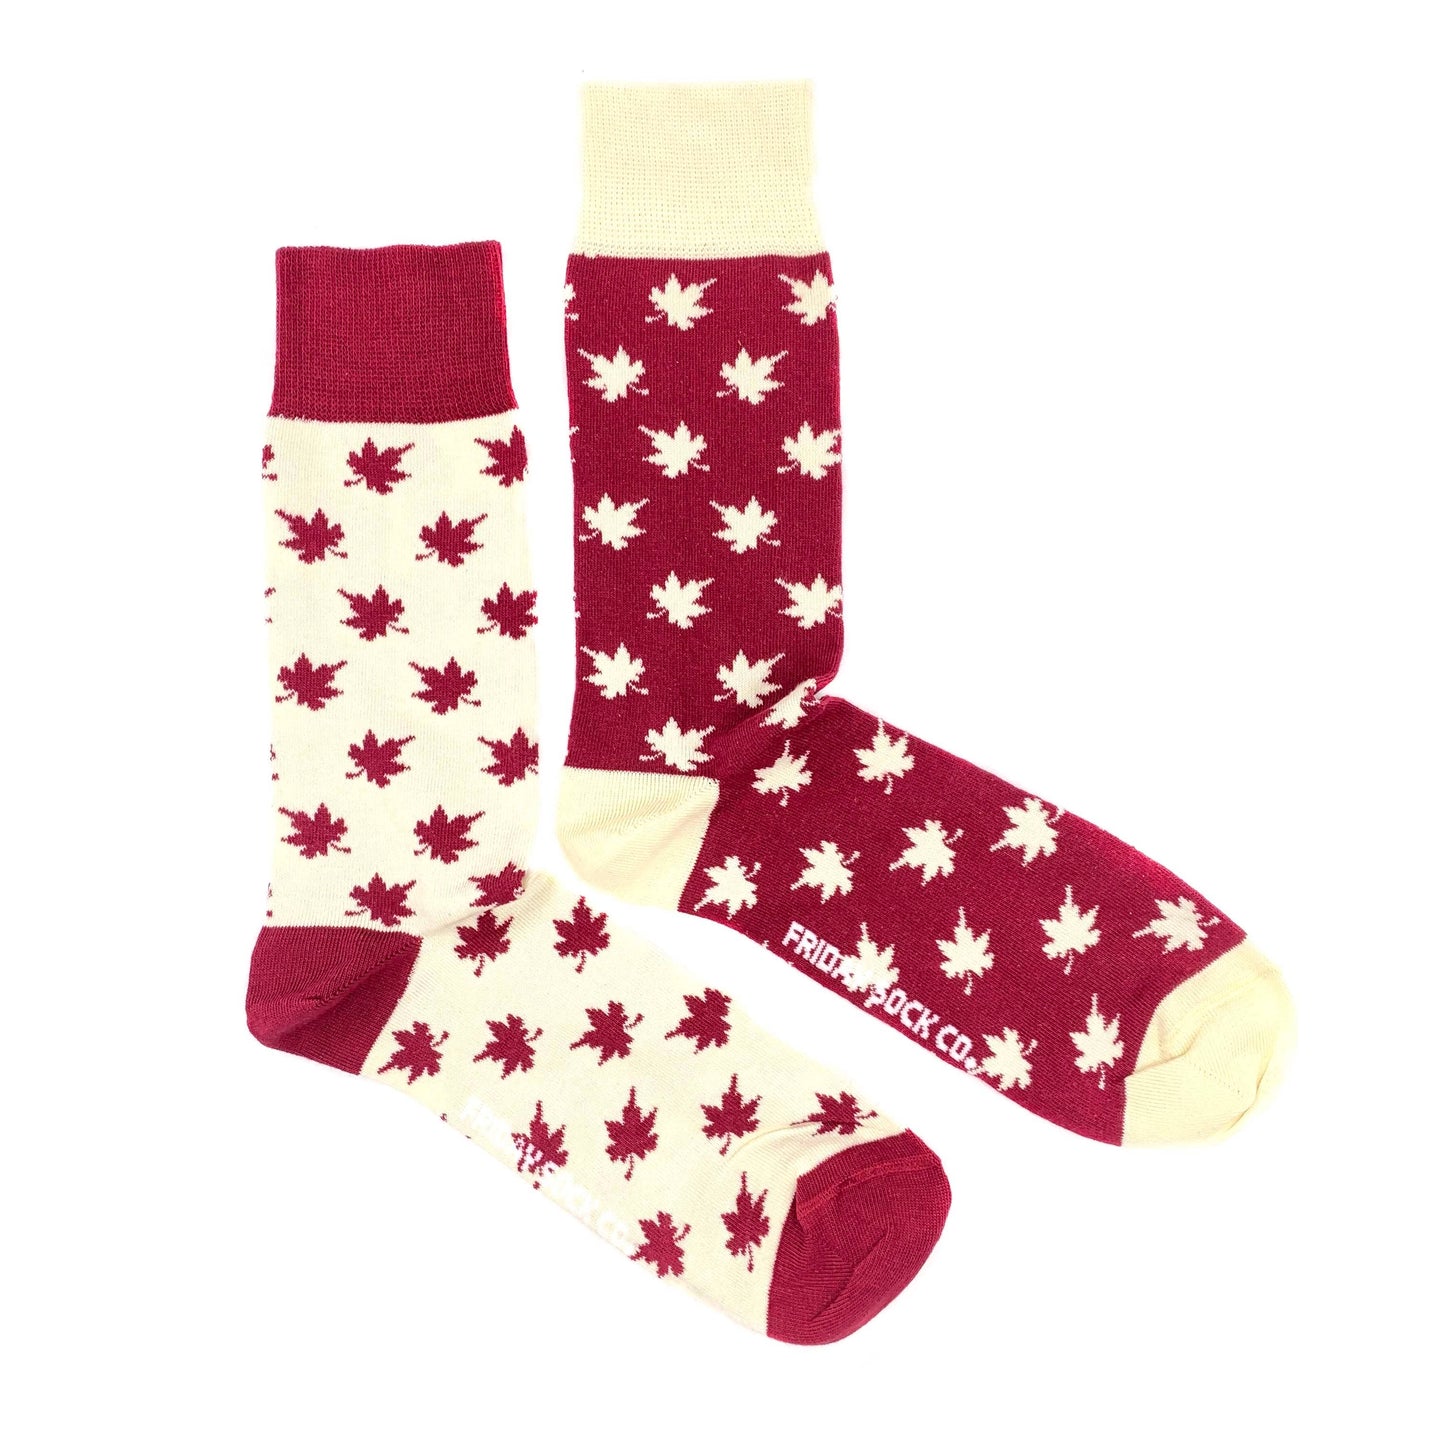 Friday Sock Co. - Men’s Socks | Maple Leaf | Canadiana | Red and White